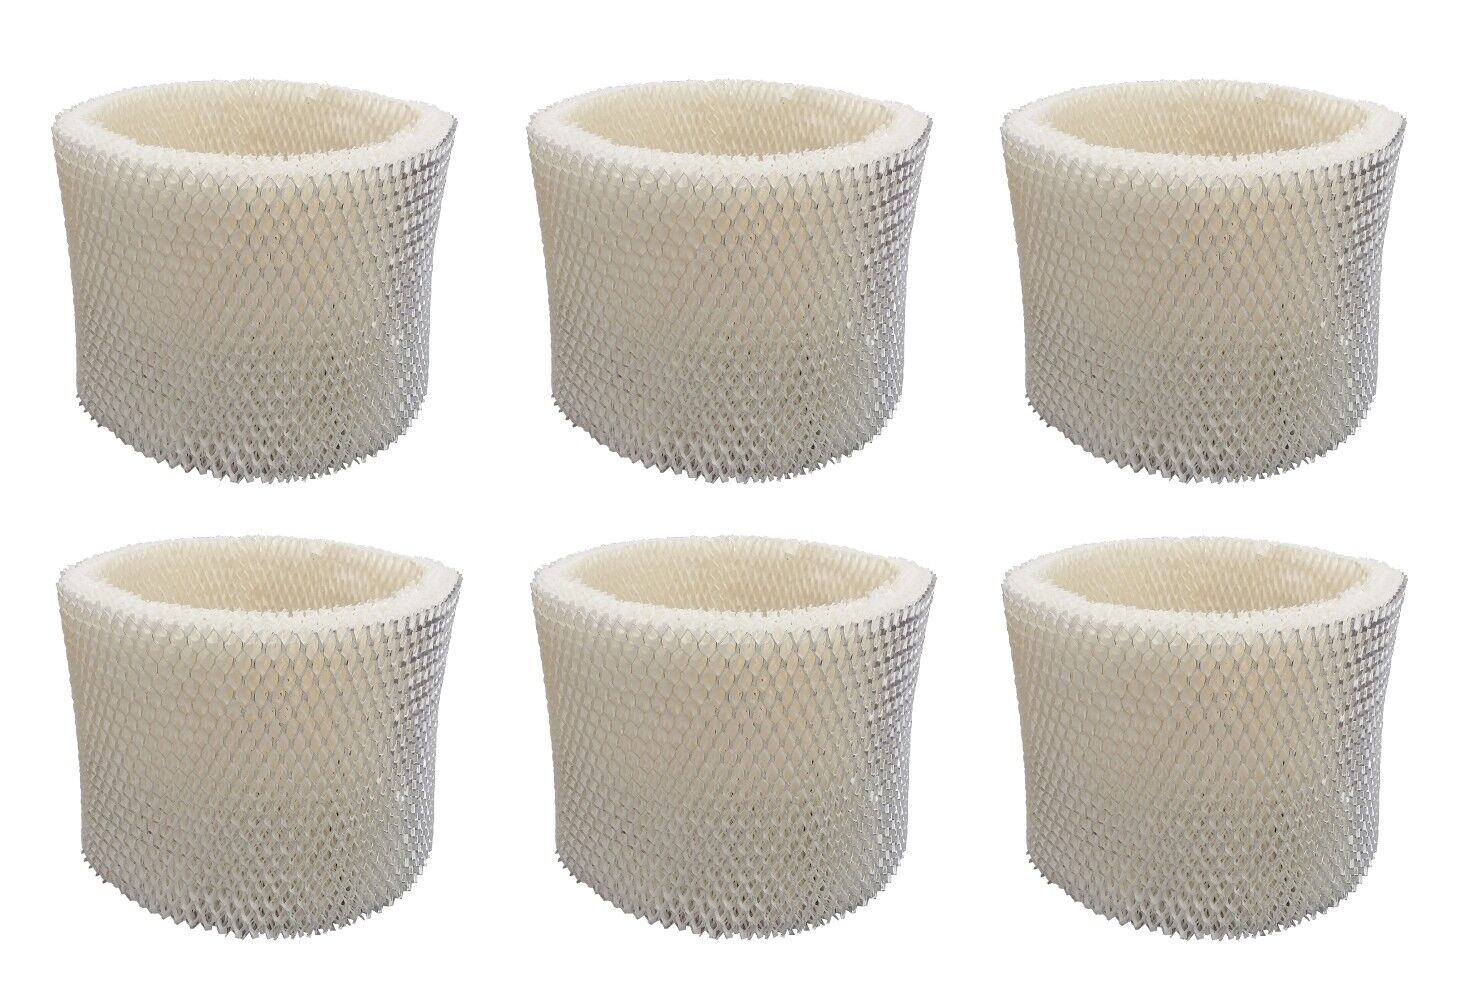 EFP Humidifier Filters for Bestair Honeywell Quietcare HW14 HCM6009 - 6-Pack